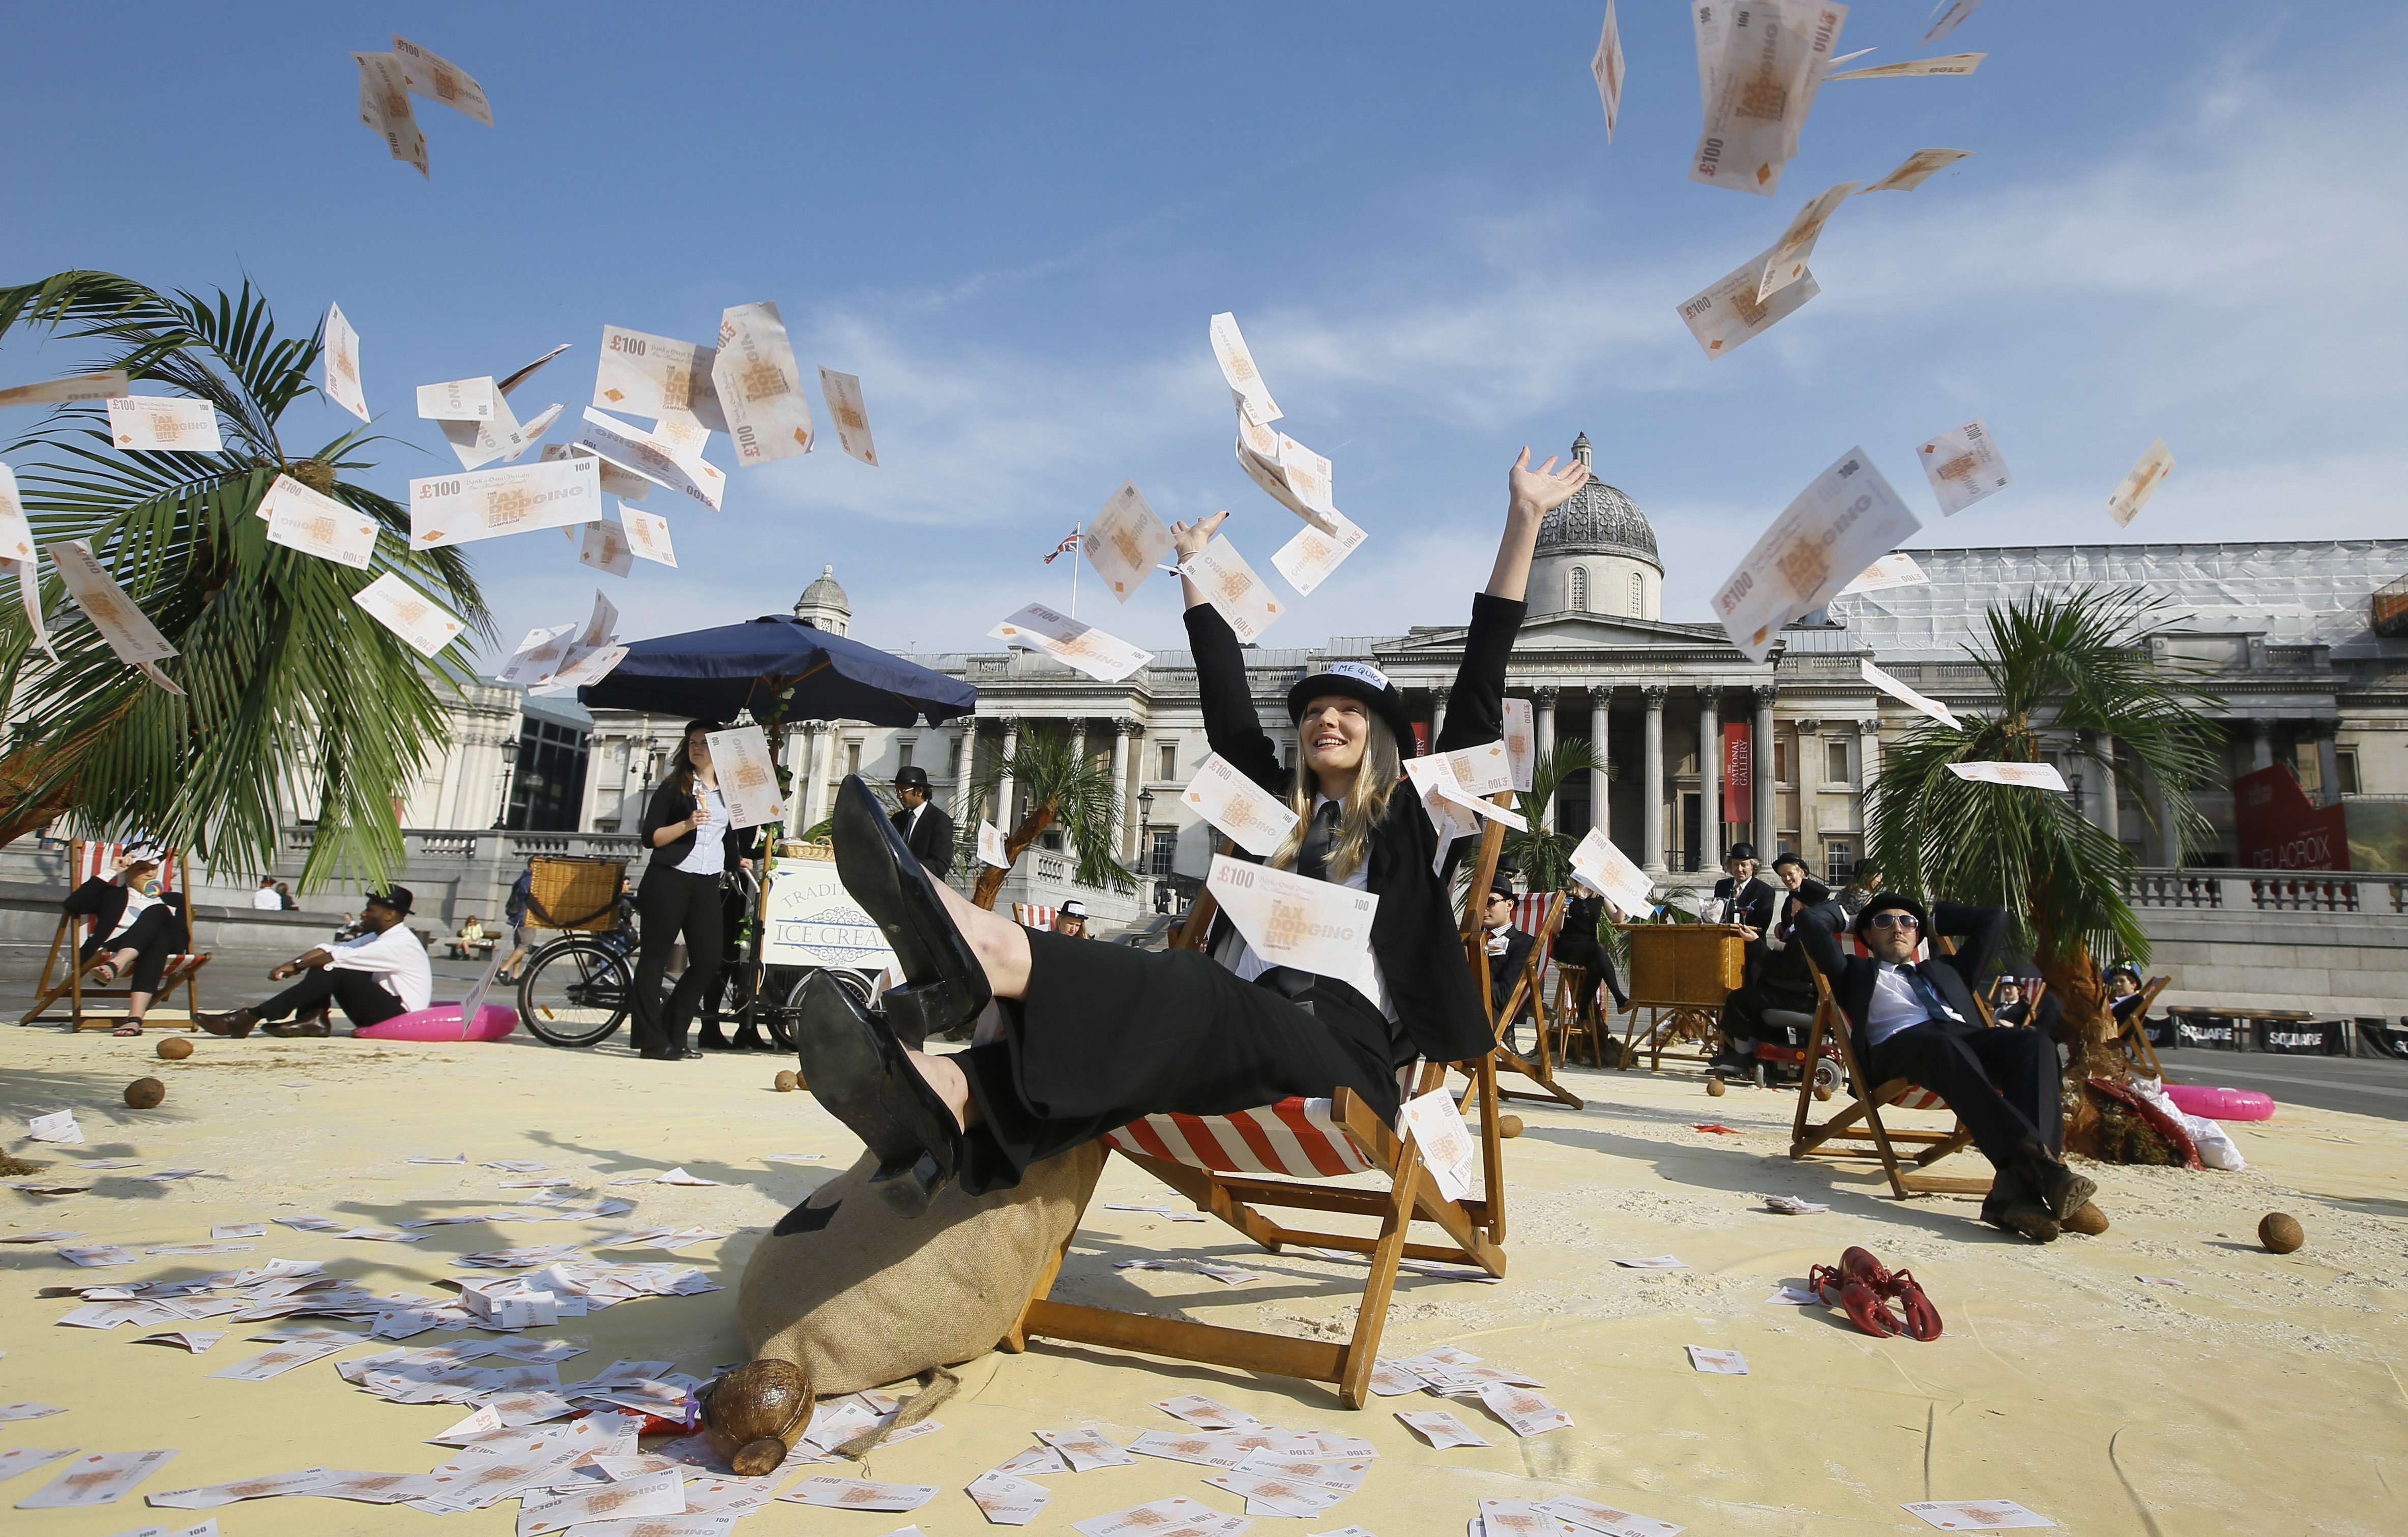 A protester throws fake money into the air in a “tropical tax haven beach” in Trafalgar Square in London. NGOs including Oxfam, Action Aid and Christian Aid are calling for an end to tax havens. Photo: AP